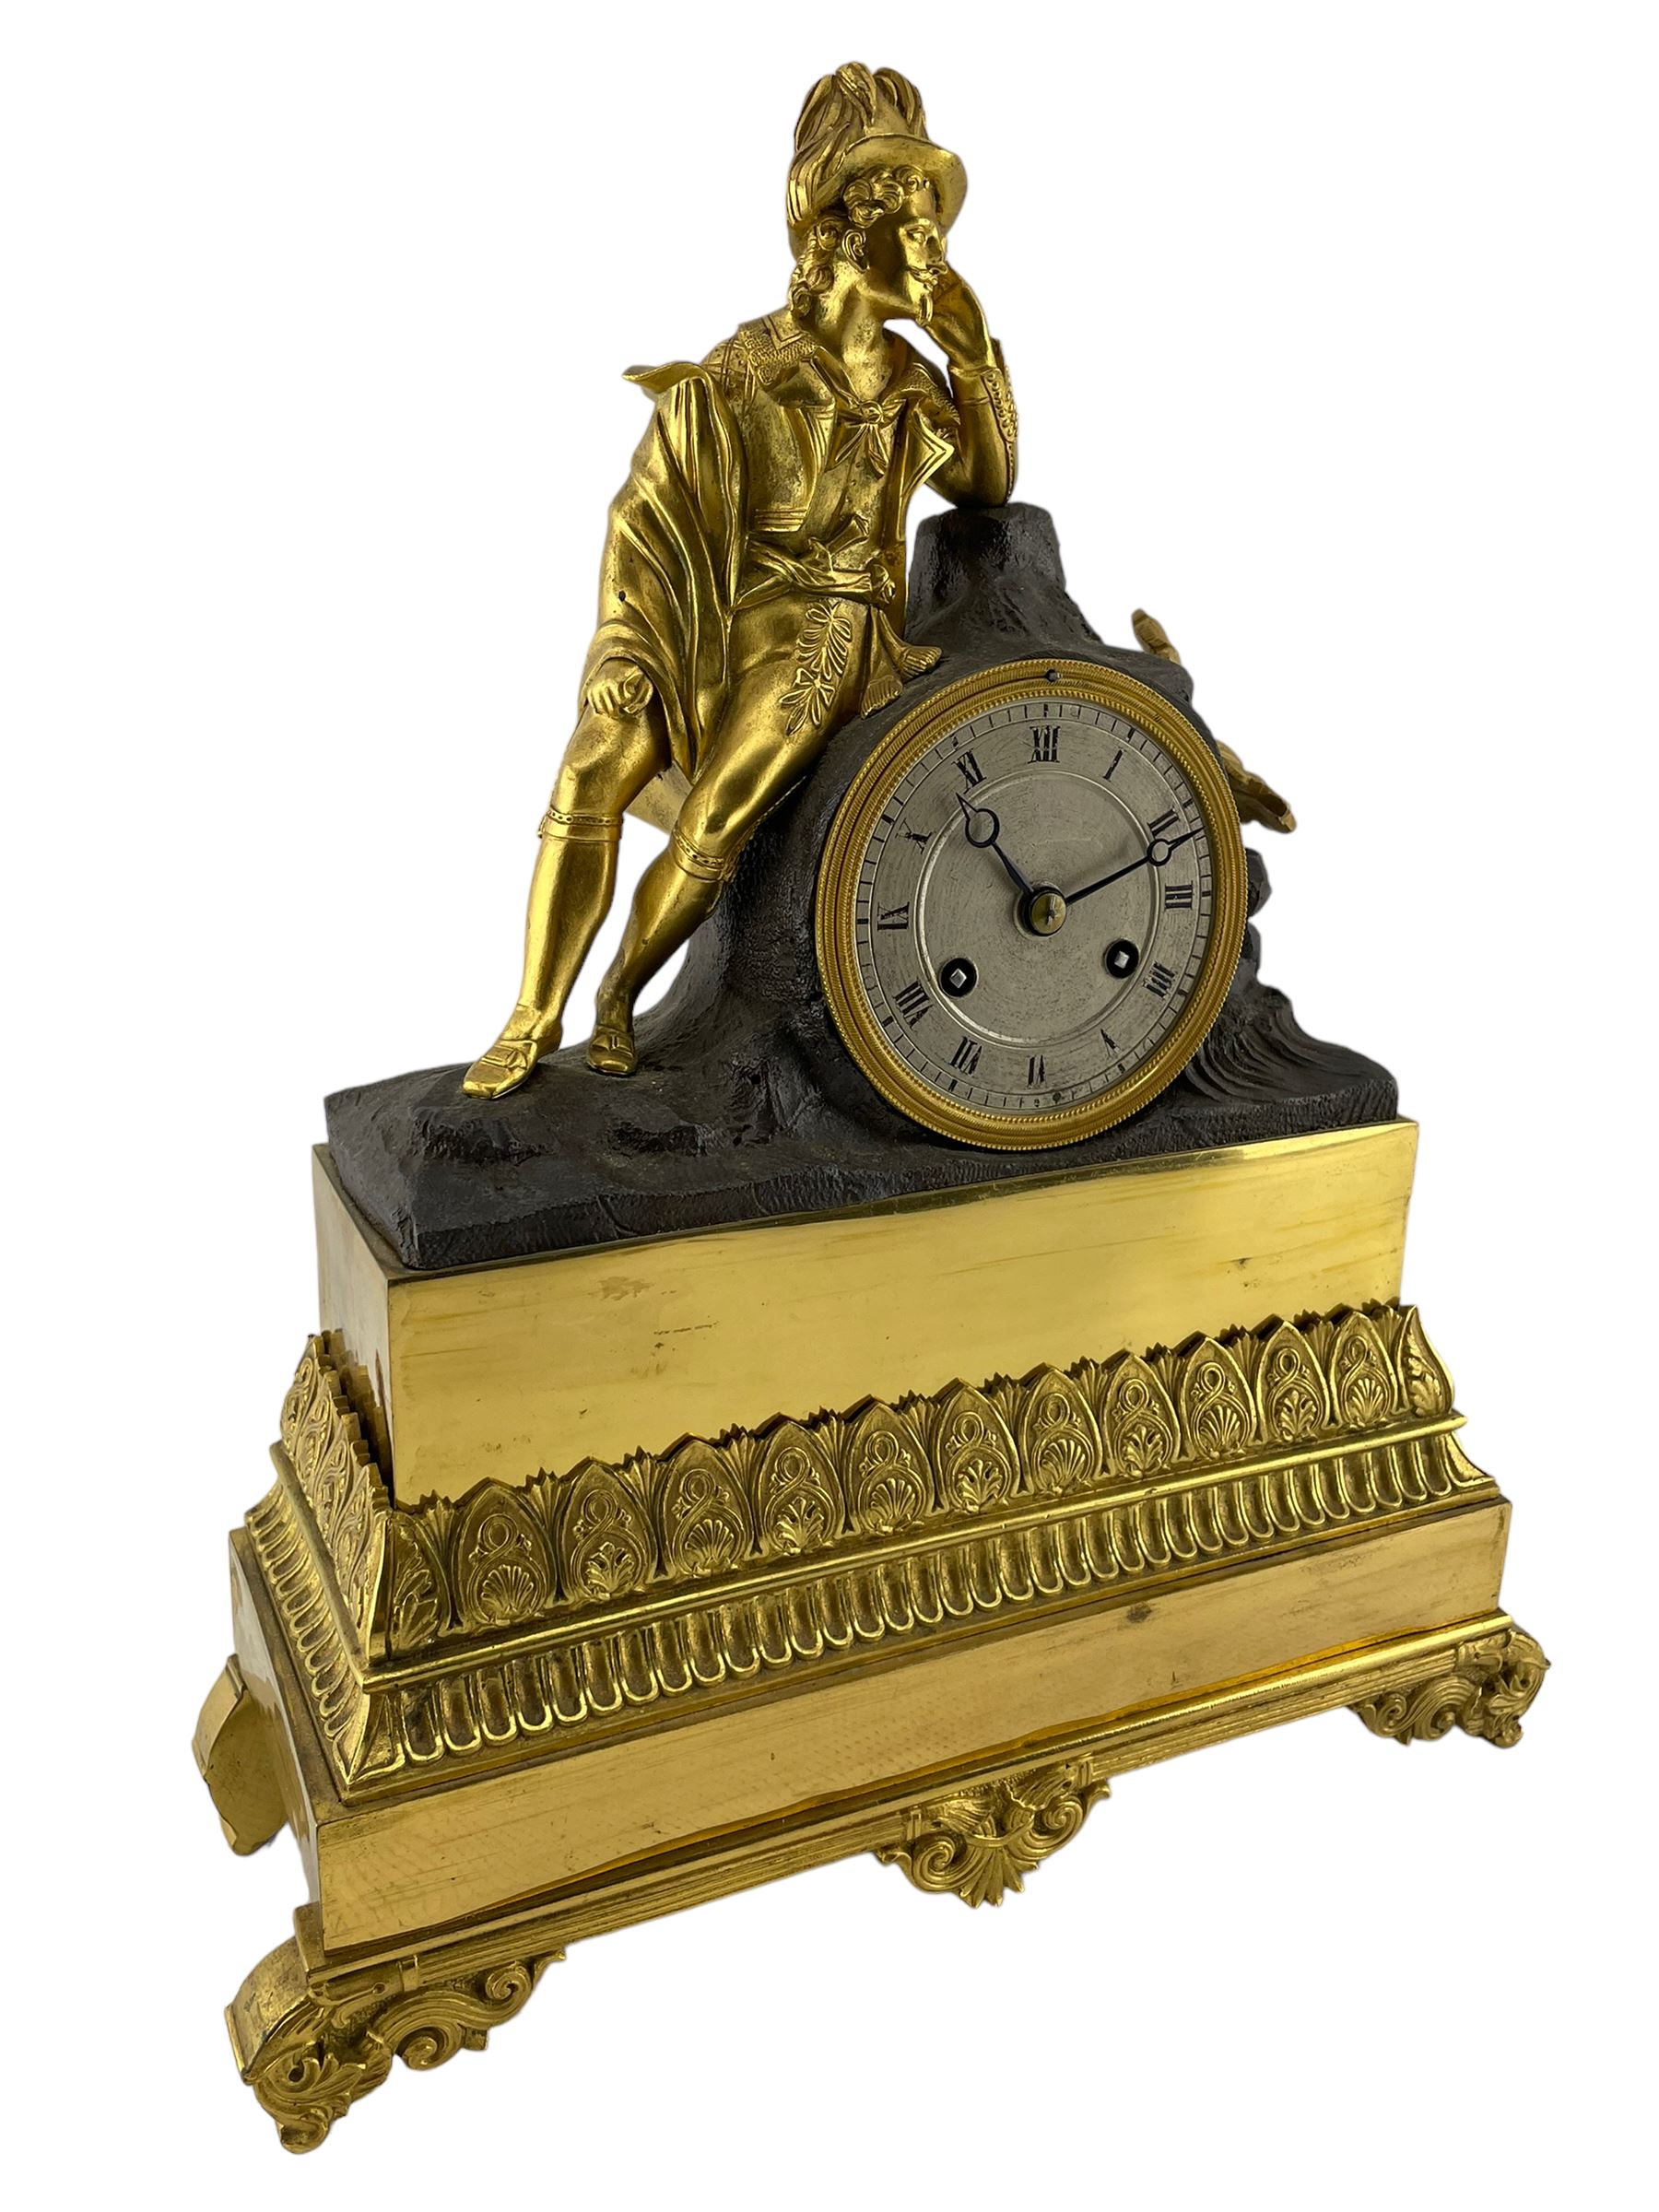 Louis Phillipe - 8-day French striking mantle clock circa 1840 - Image 3 of 11